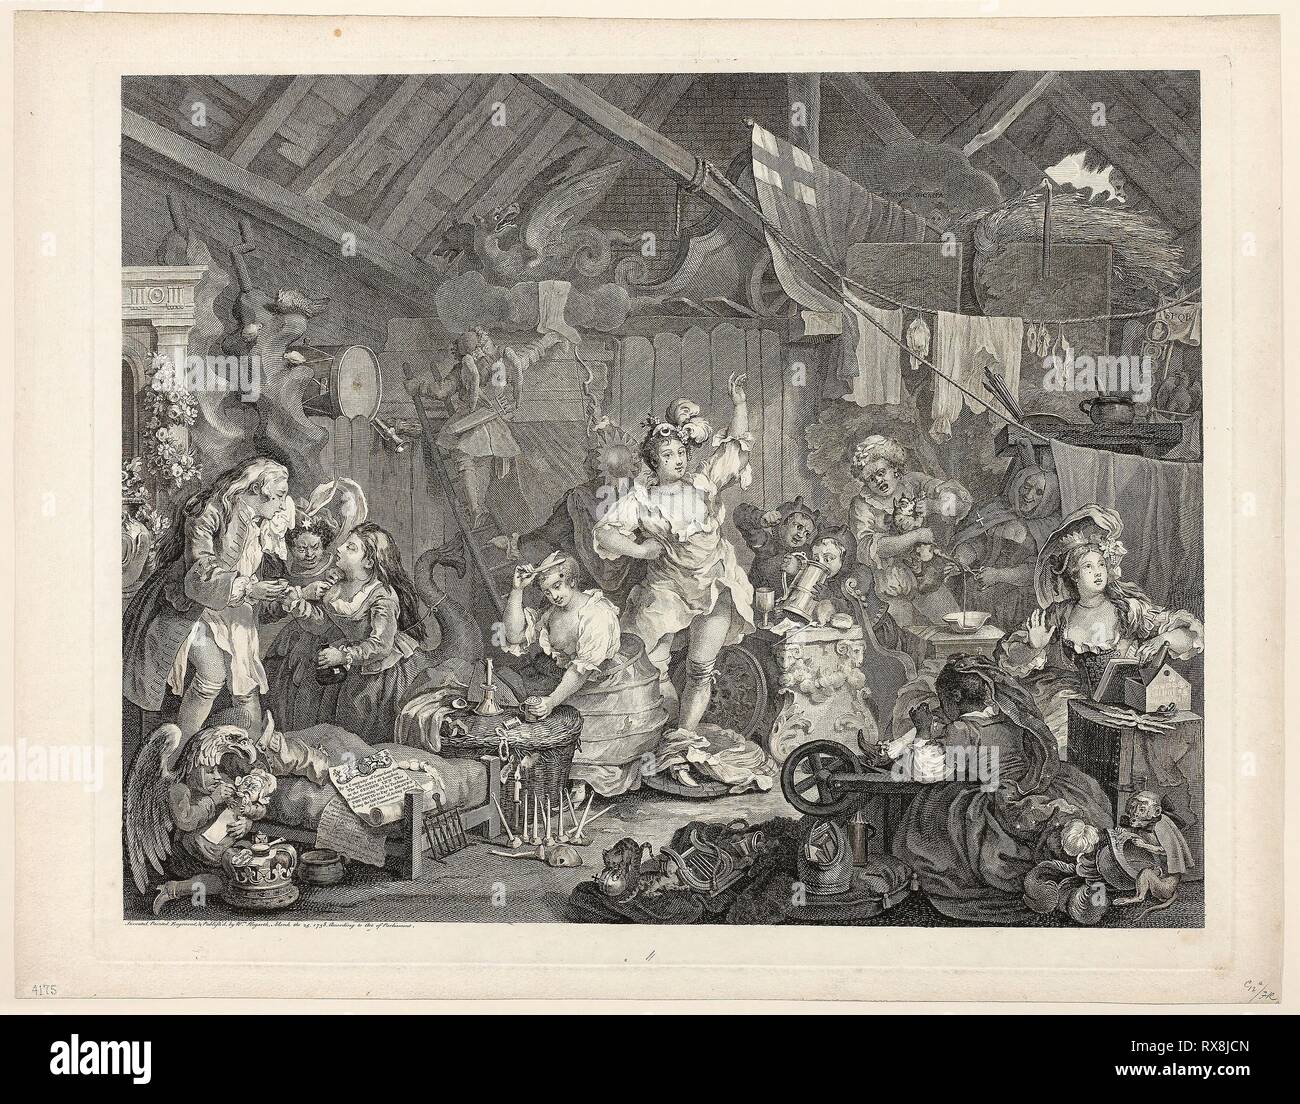 Strolling Actresses Dressing in a Barn. William Hogarth; English, 1697-1764. Date: 1738. Dimensions: 423 × 538 mm (image); 450 × 561 mm (plate); 493 × 628 mm (sheet). Engraving in black on ivory laid paper. Origin: England. Museum: The Chicago Art Institute. Stock Photo